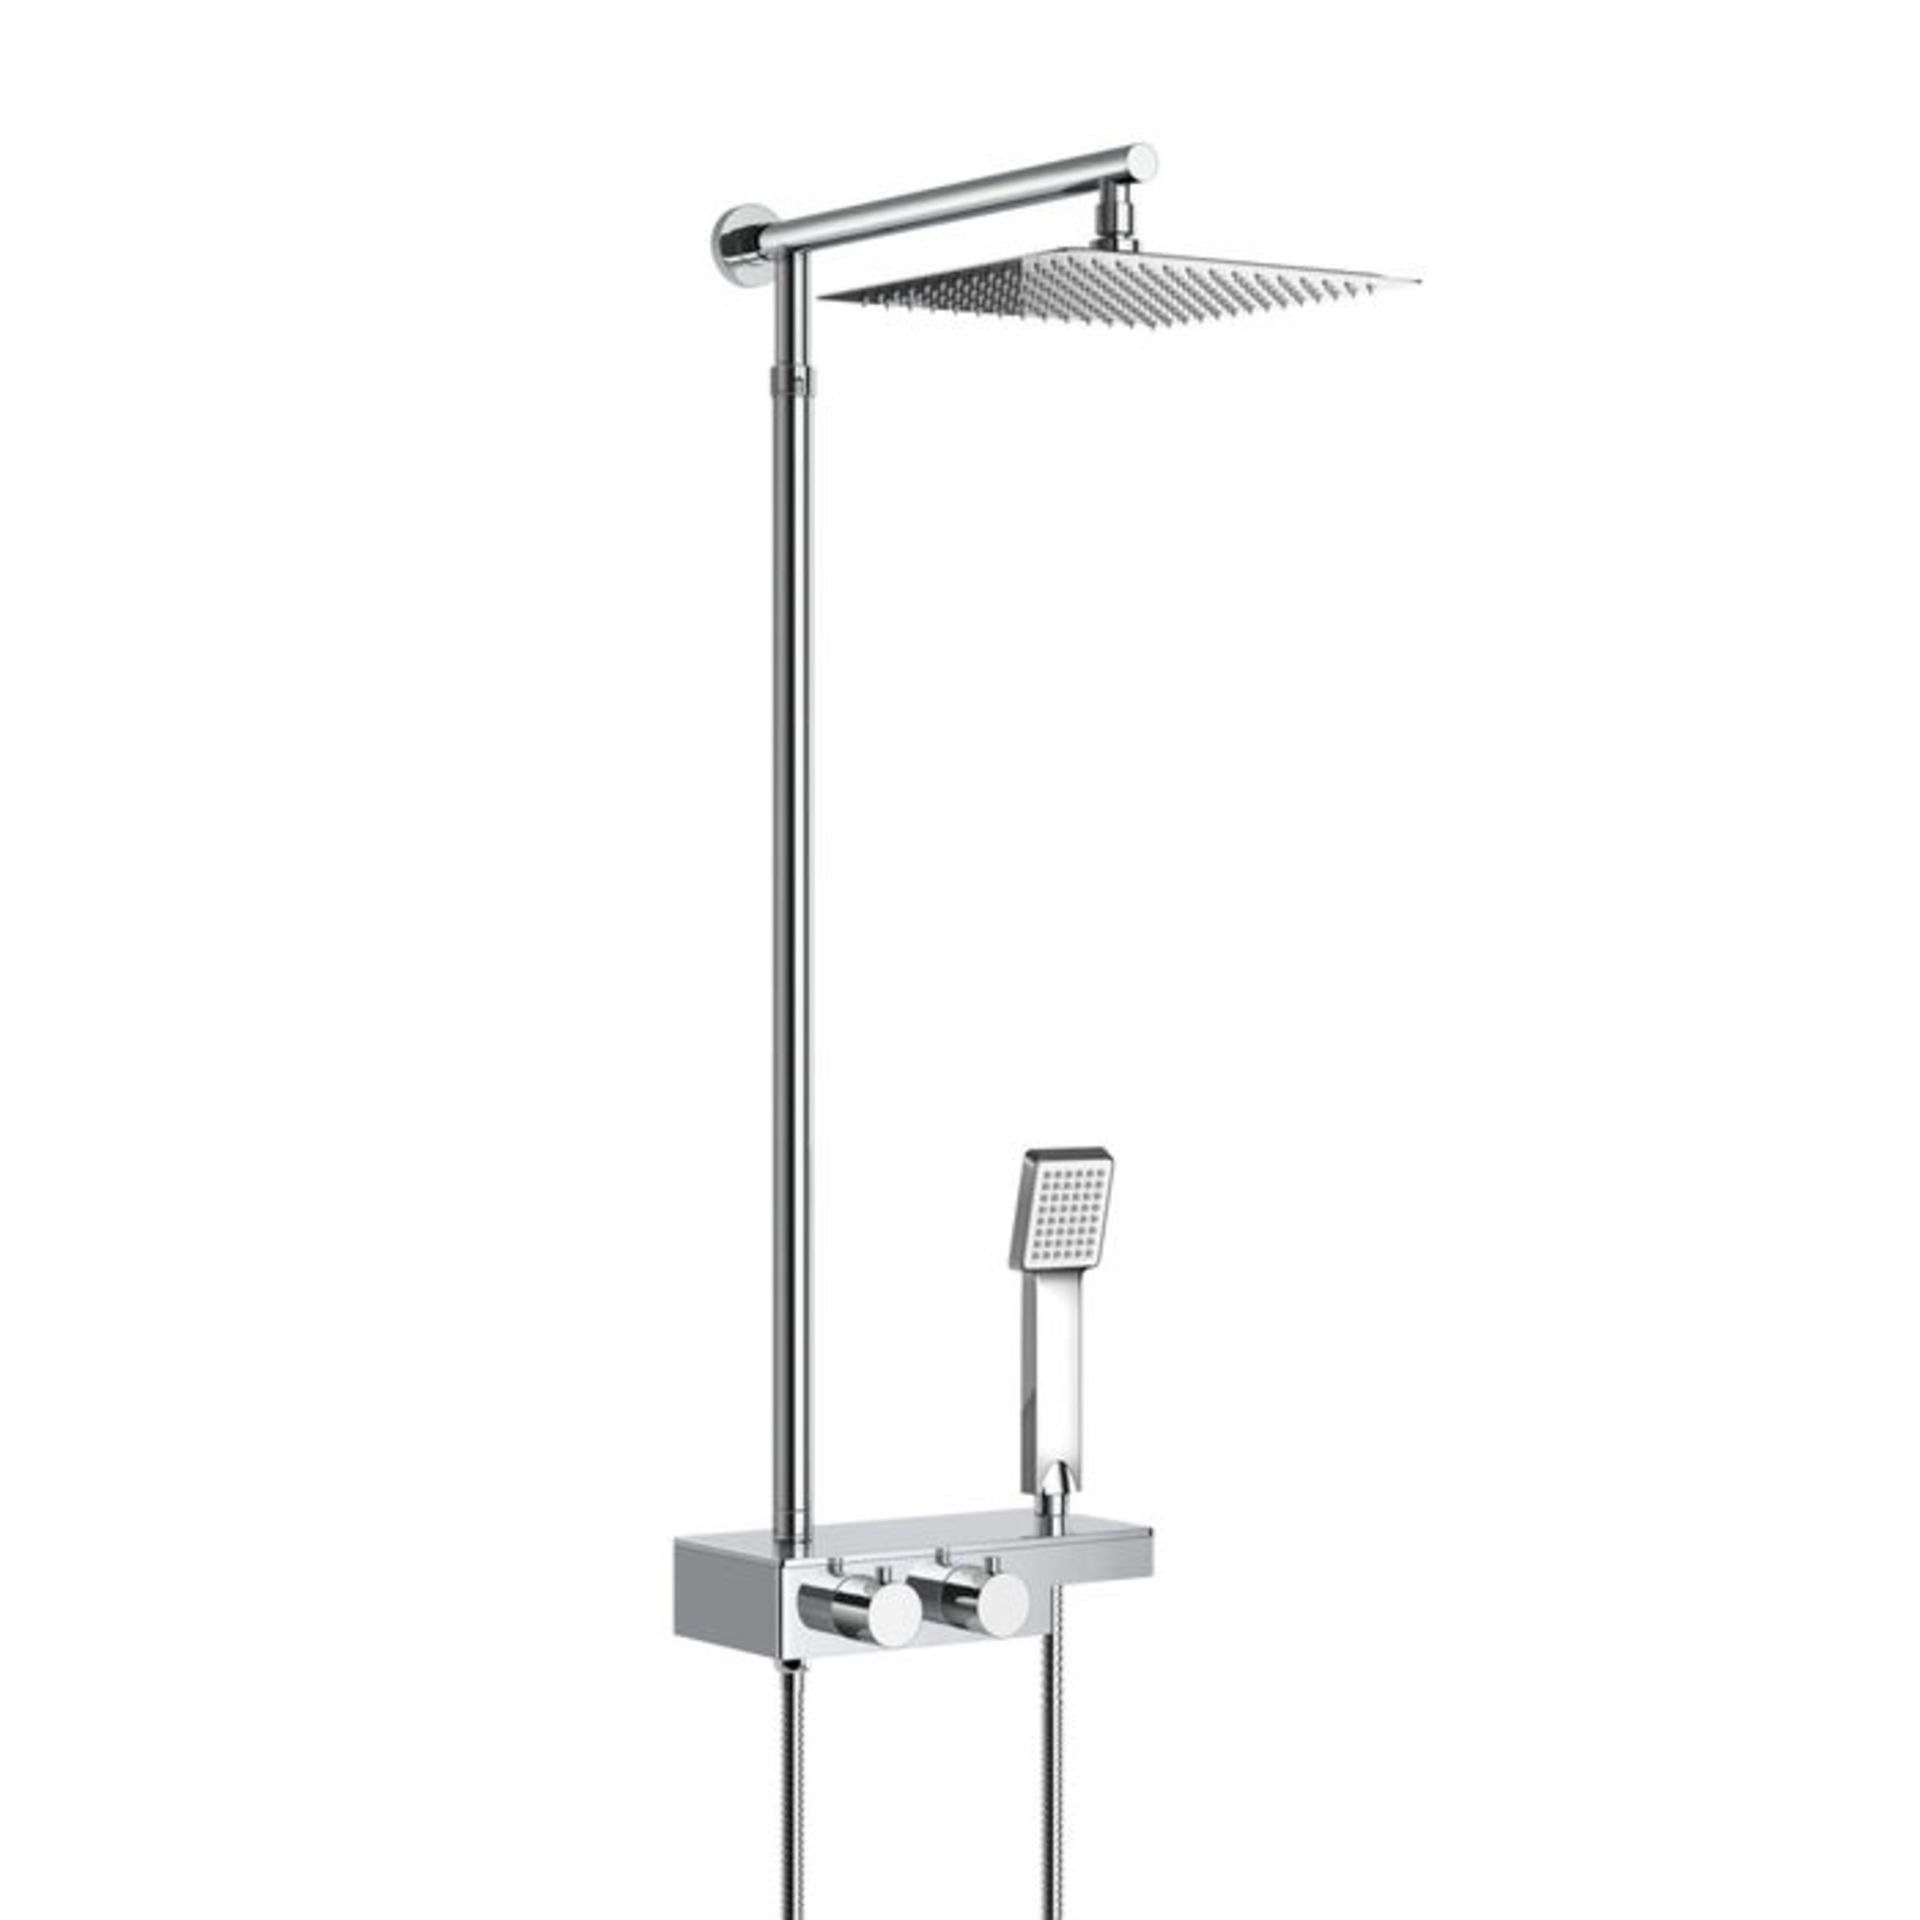 (XL131) 250mm Thermostatic SafeTouch Buildup Rain Shower Set Chrome Square - 25 cm - With Hand ...( - Image 2 of 3